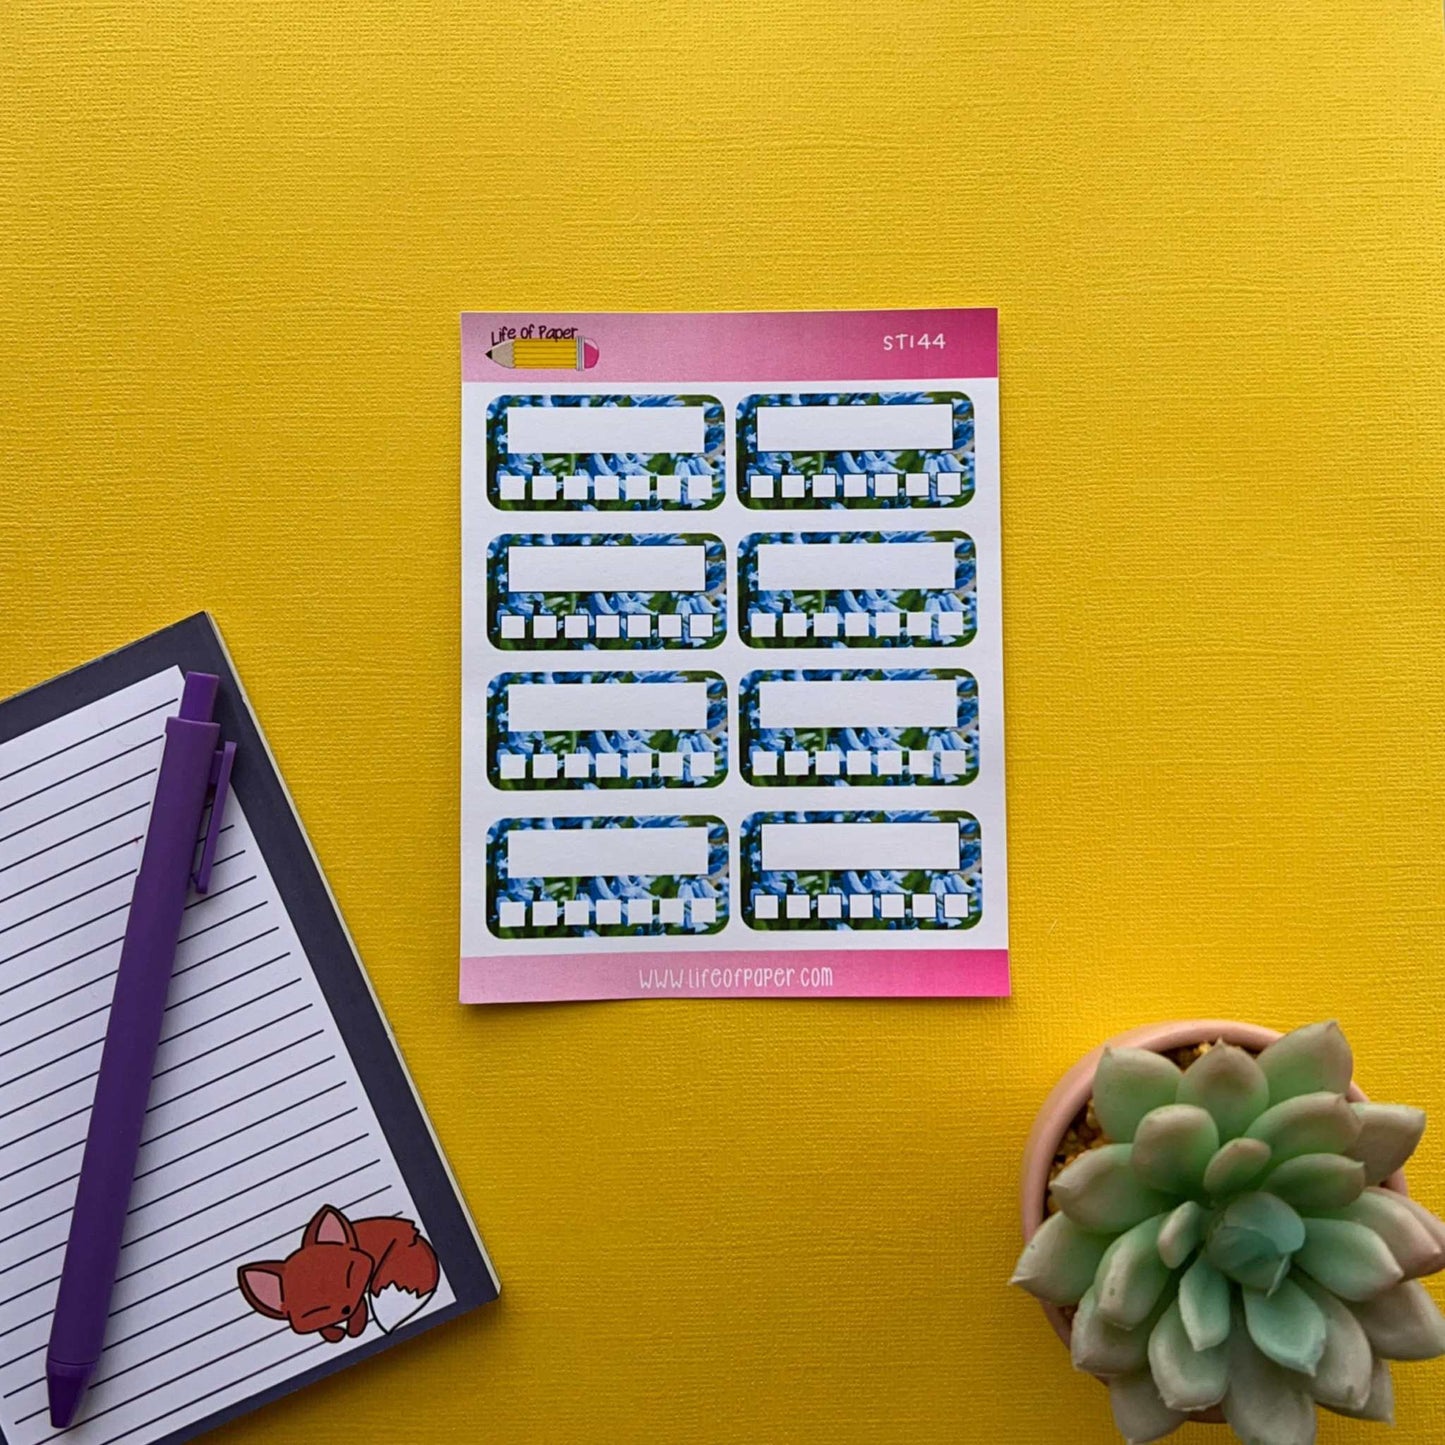 A sheet of Weekly Habit Tracker Planner Stickers, ideal as habit tracking stickers, is placed on a yellow surface. Next to it, there is an open notepad with a purple pen on top. A small, potted succulent plant sits nearby.